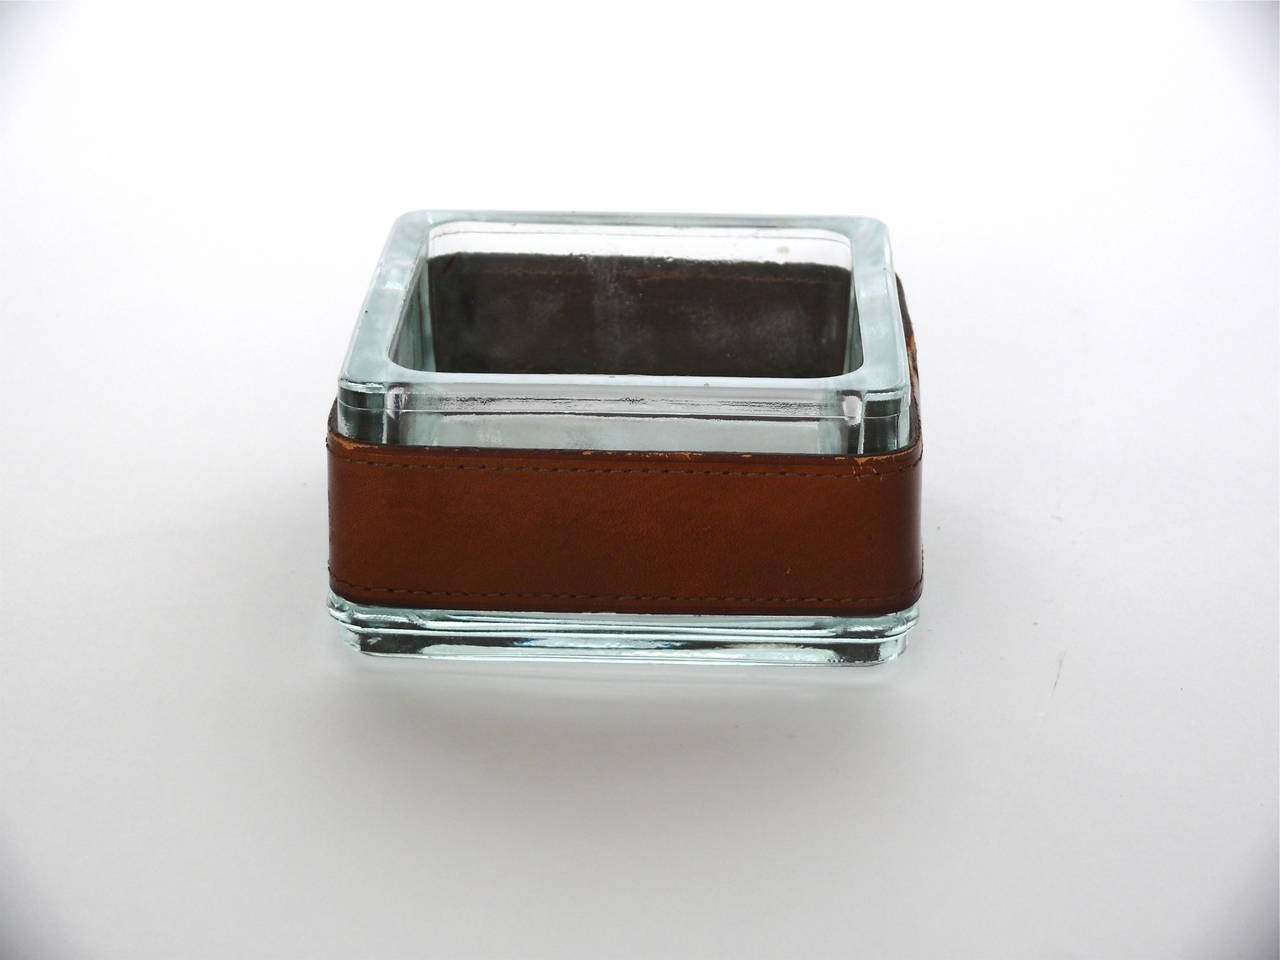 Handsome leather and glass catch all or ashtray. Square glass with distressed saddle leather band. Good vintage condition.